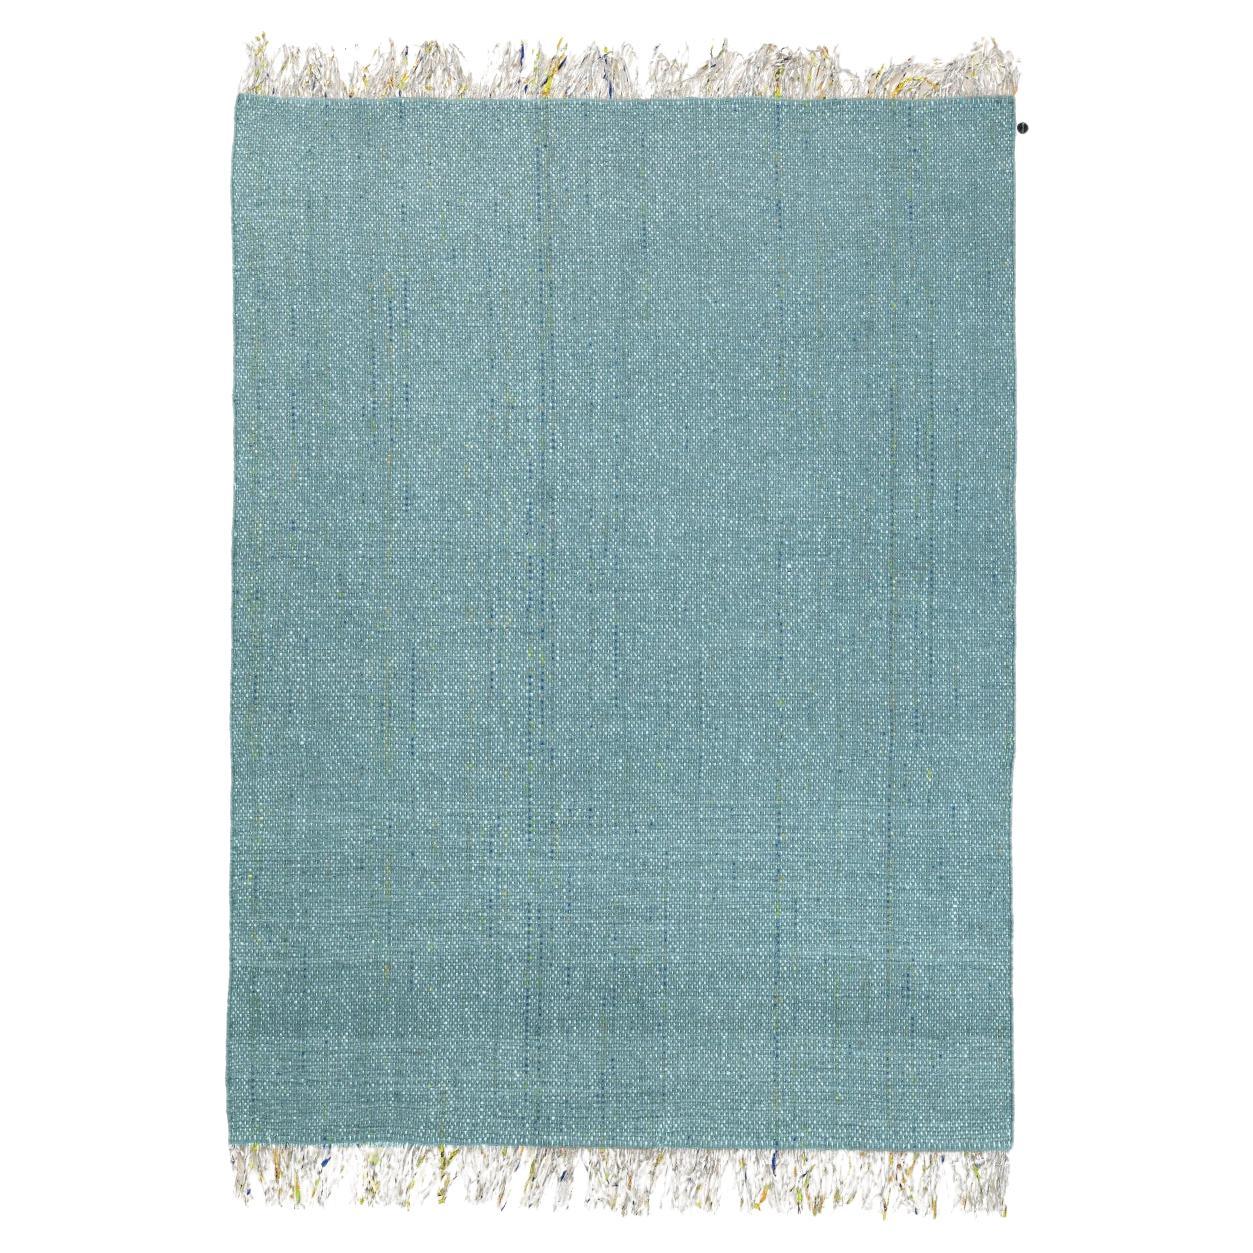 Candy Wrapper Rug_Dining_arctic / Award Winning Woven Rug by Jutta Werner